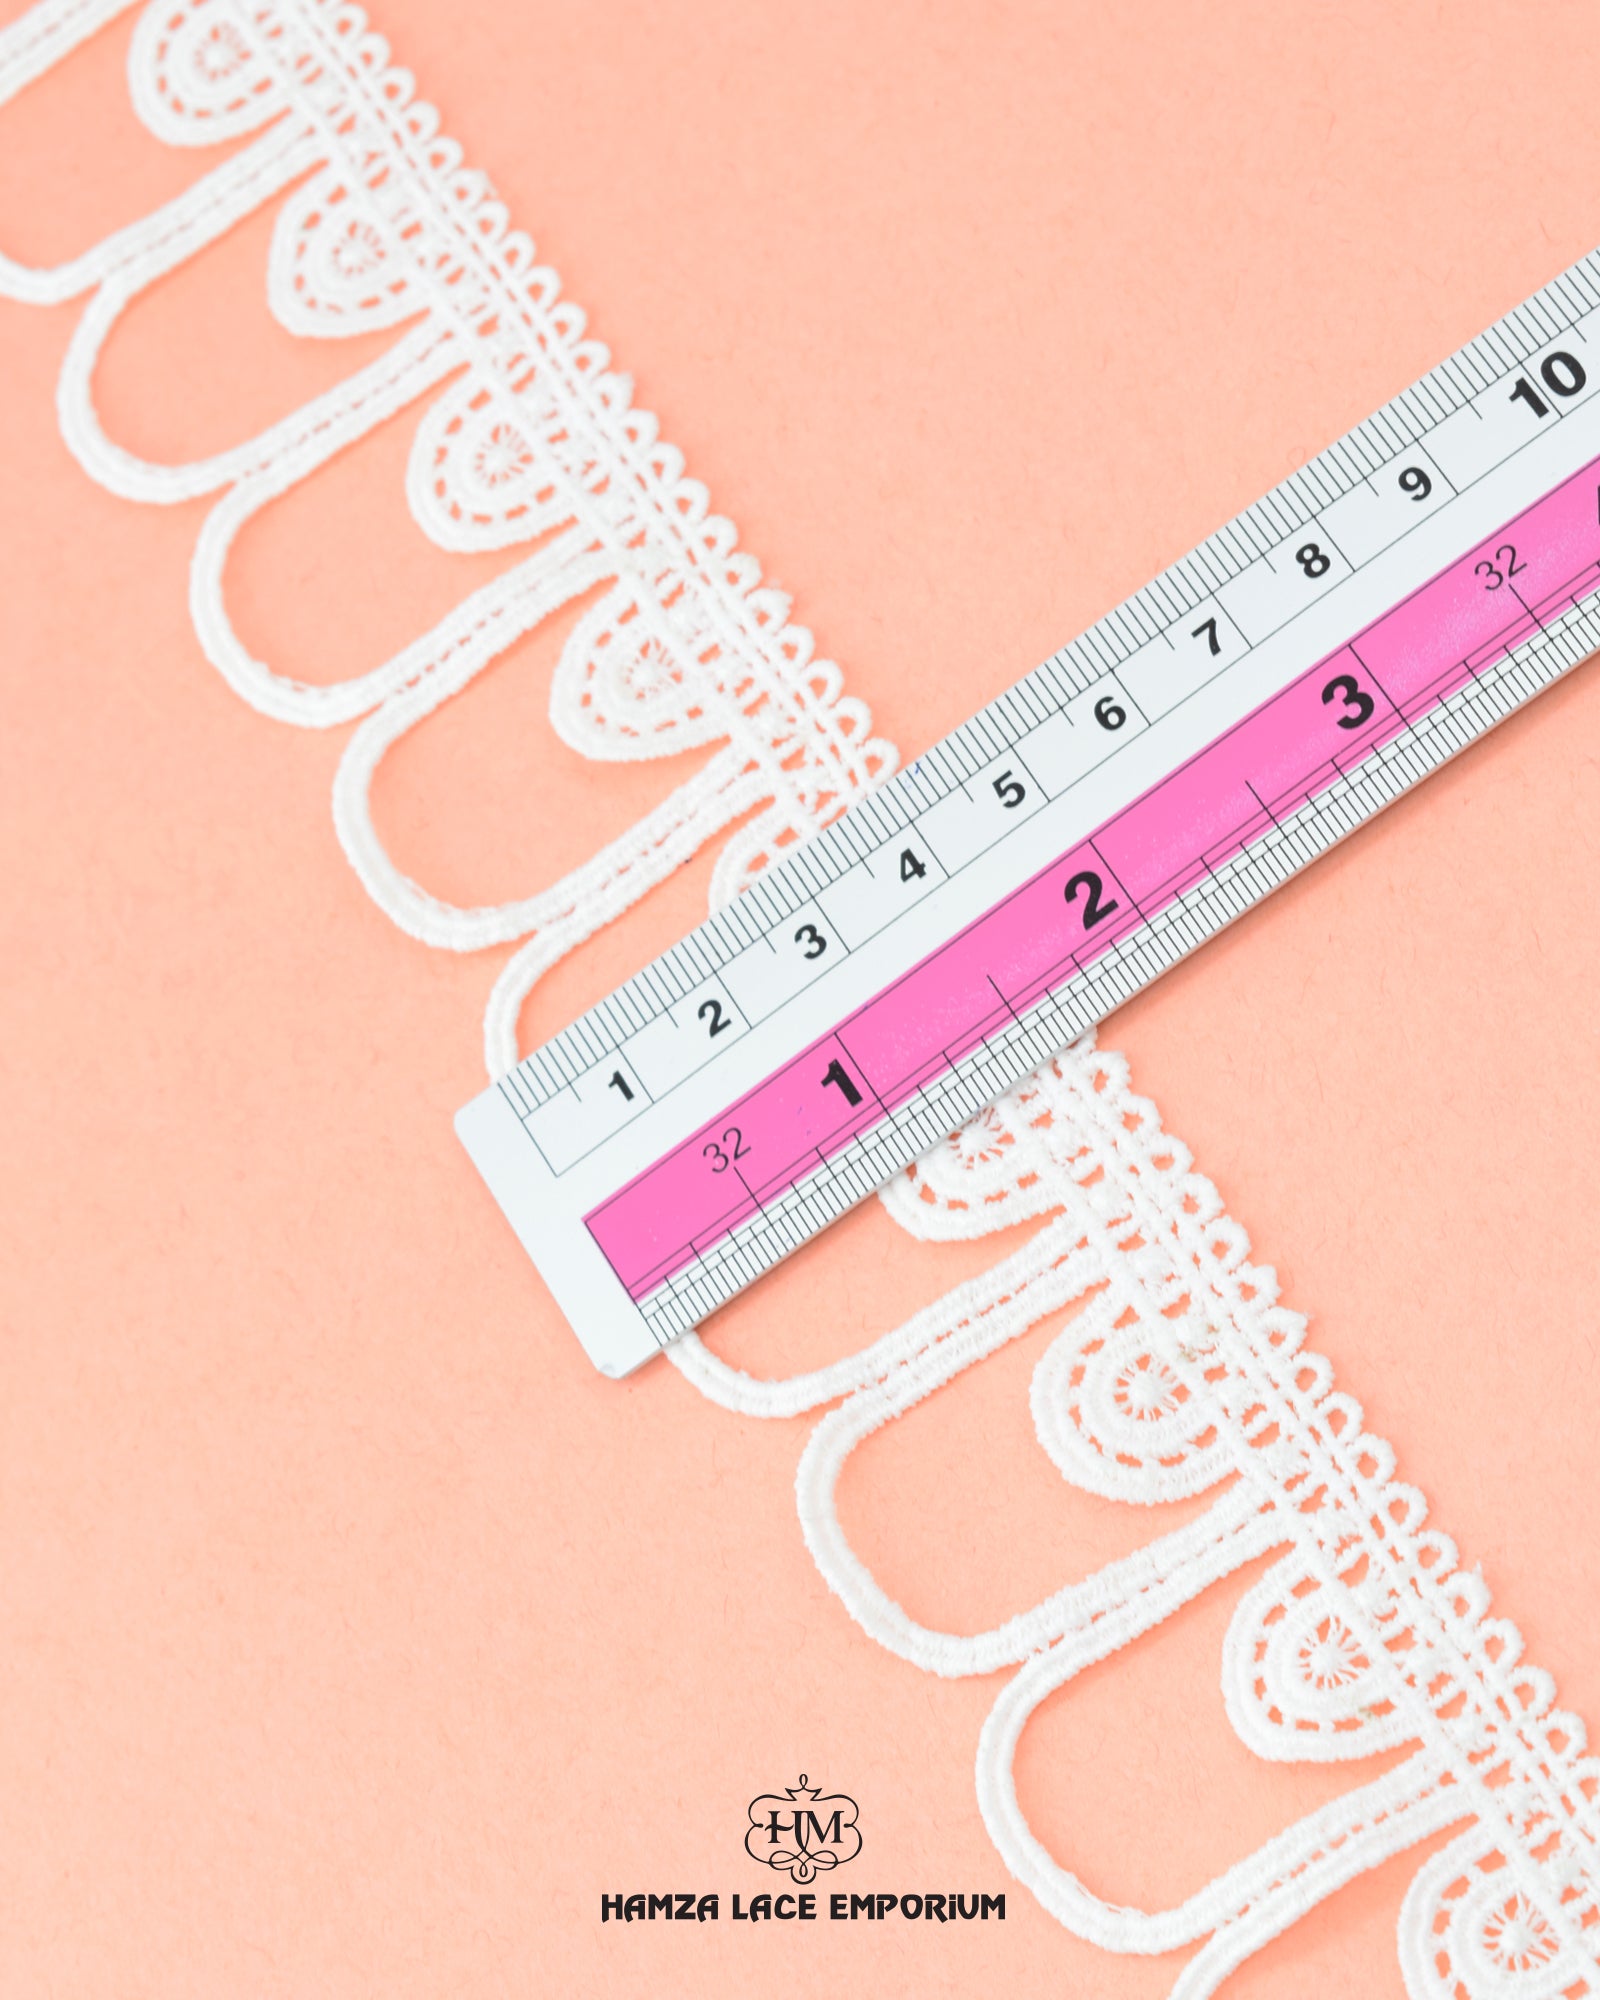 A Scale is measuring the size of the 'Edging Loop Lace 4962' as 1.75 inches